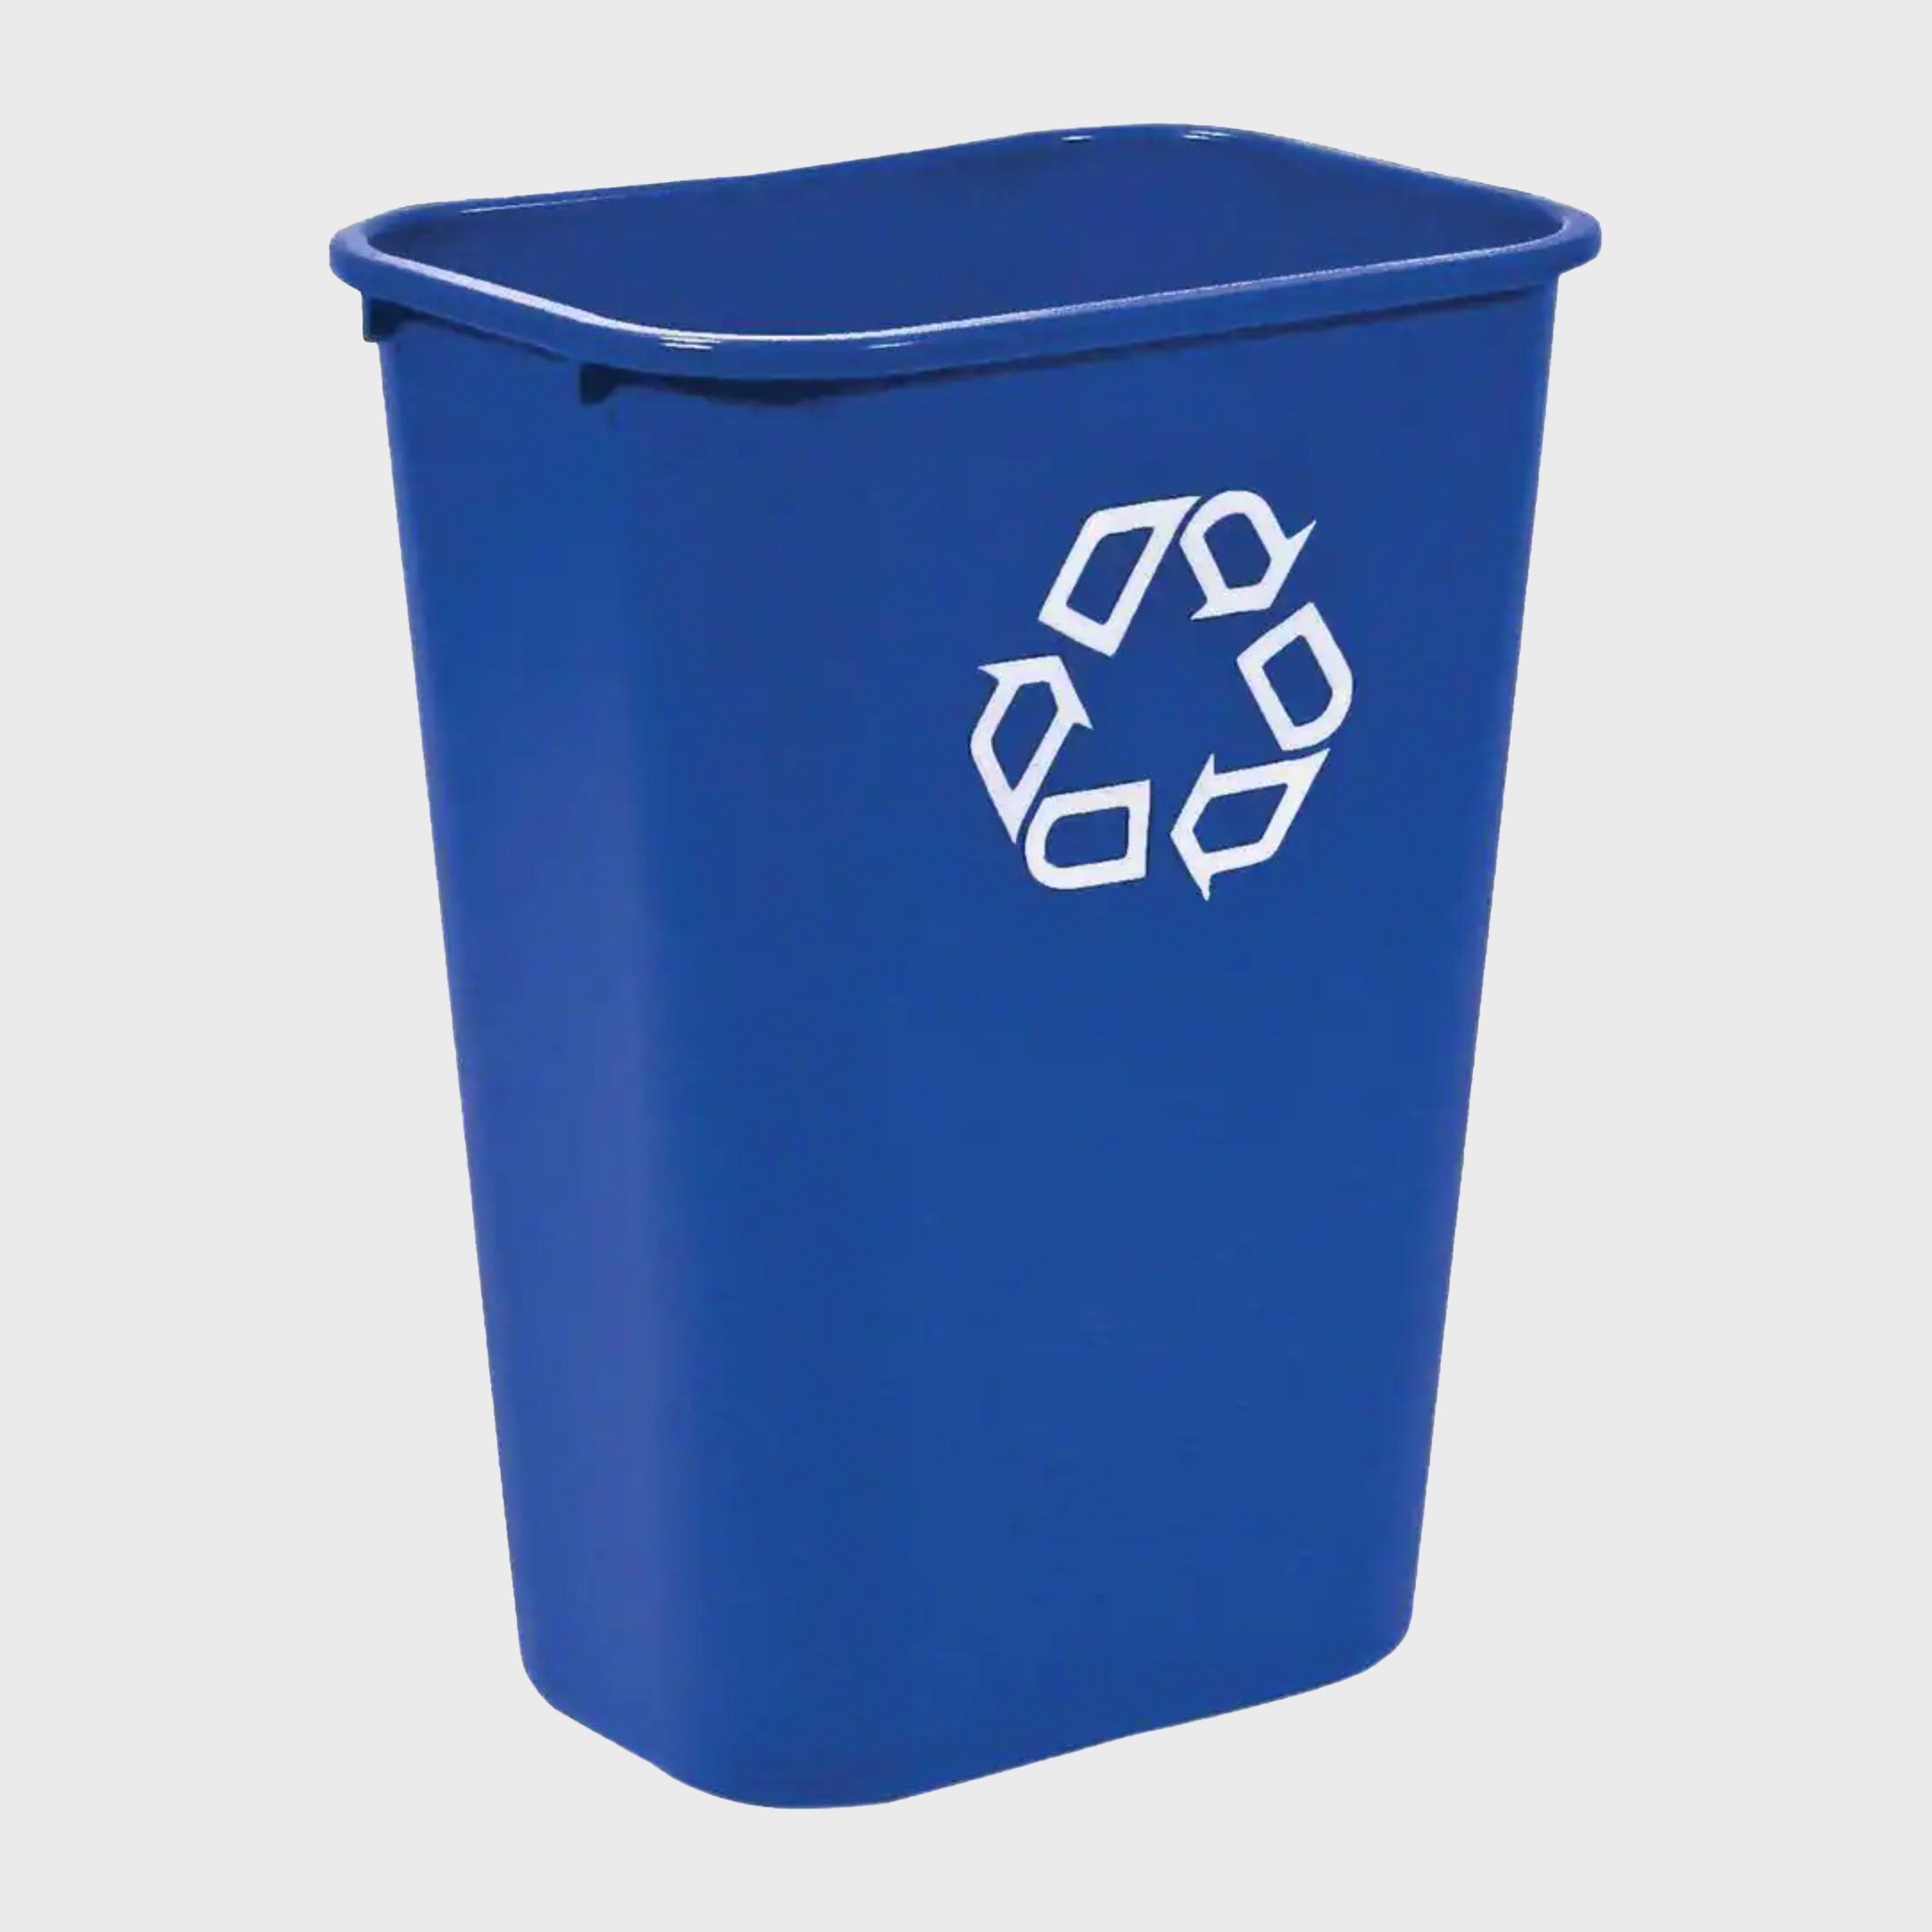 https://www.rd.com/wp-content/uploads/2022/07/Rubbermaid-Blue-Large-Recycling-Container-ecomm-via-homedepot.jpg?fit=700%2C700